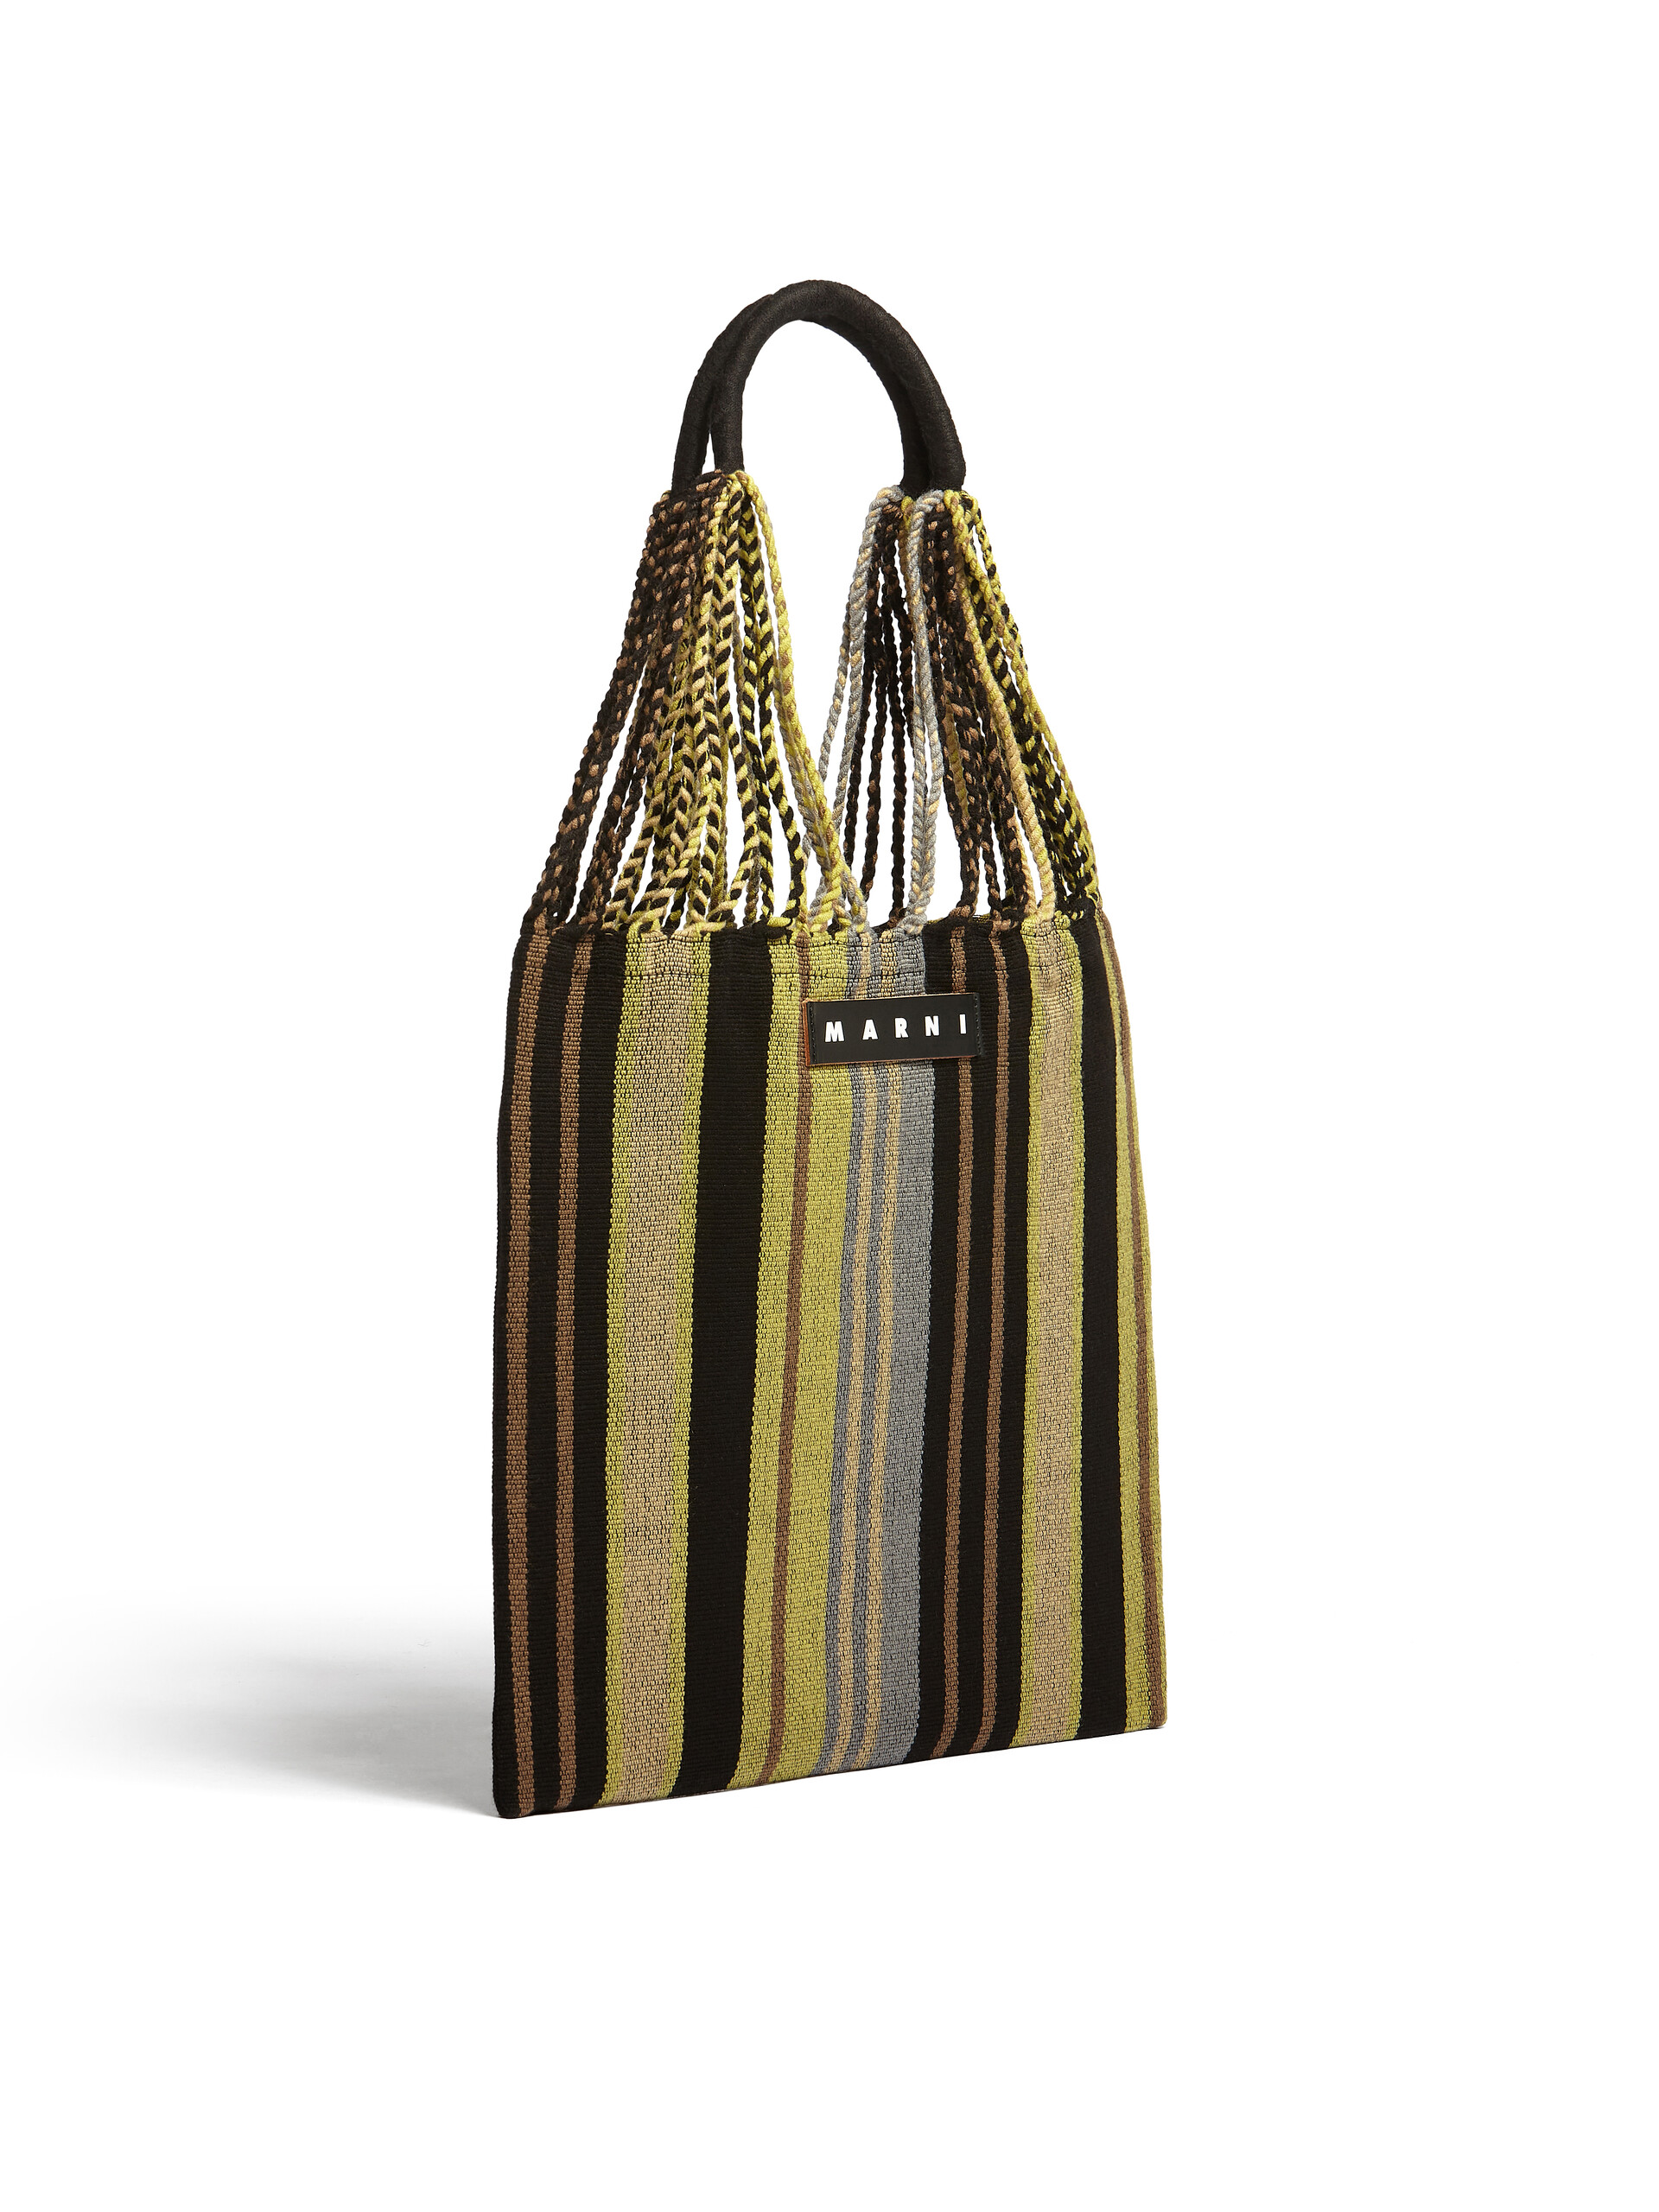 MARNI MARKET HAMMOCK bag in yellow multicolour polyester - Bags - Image 2